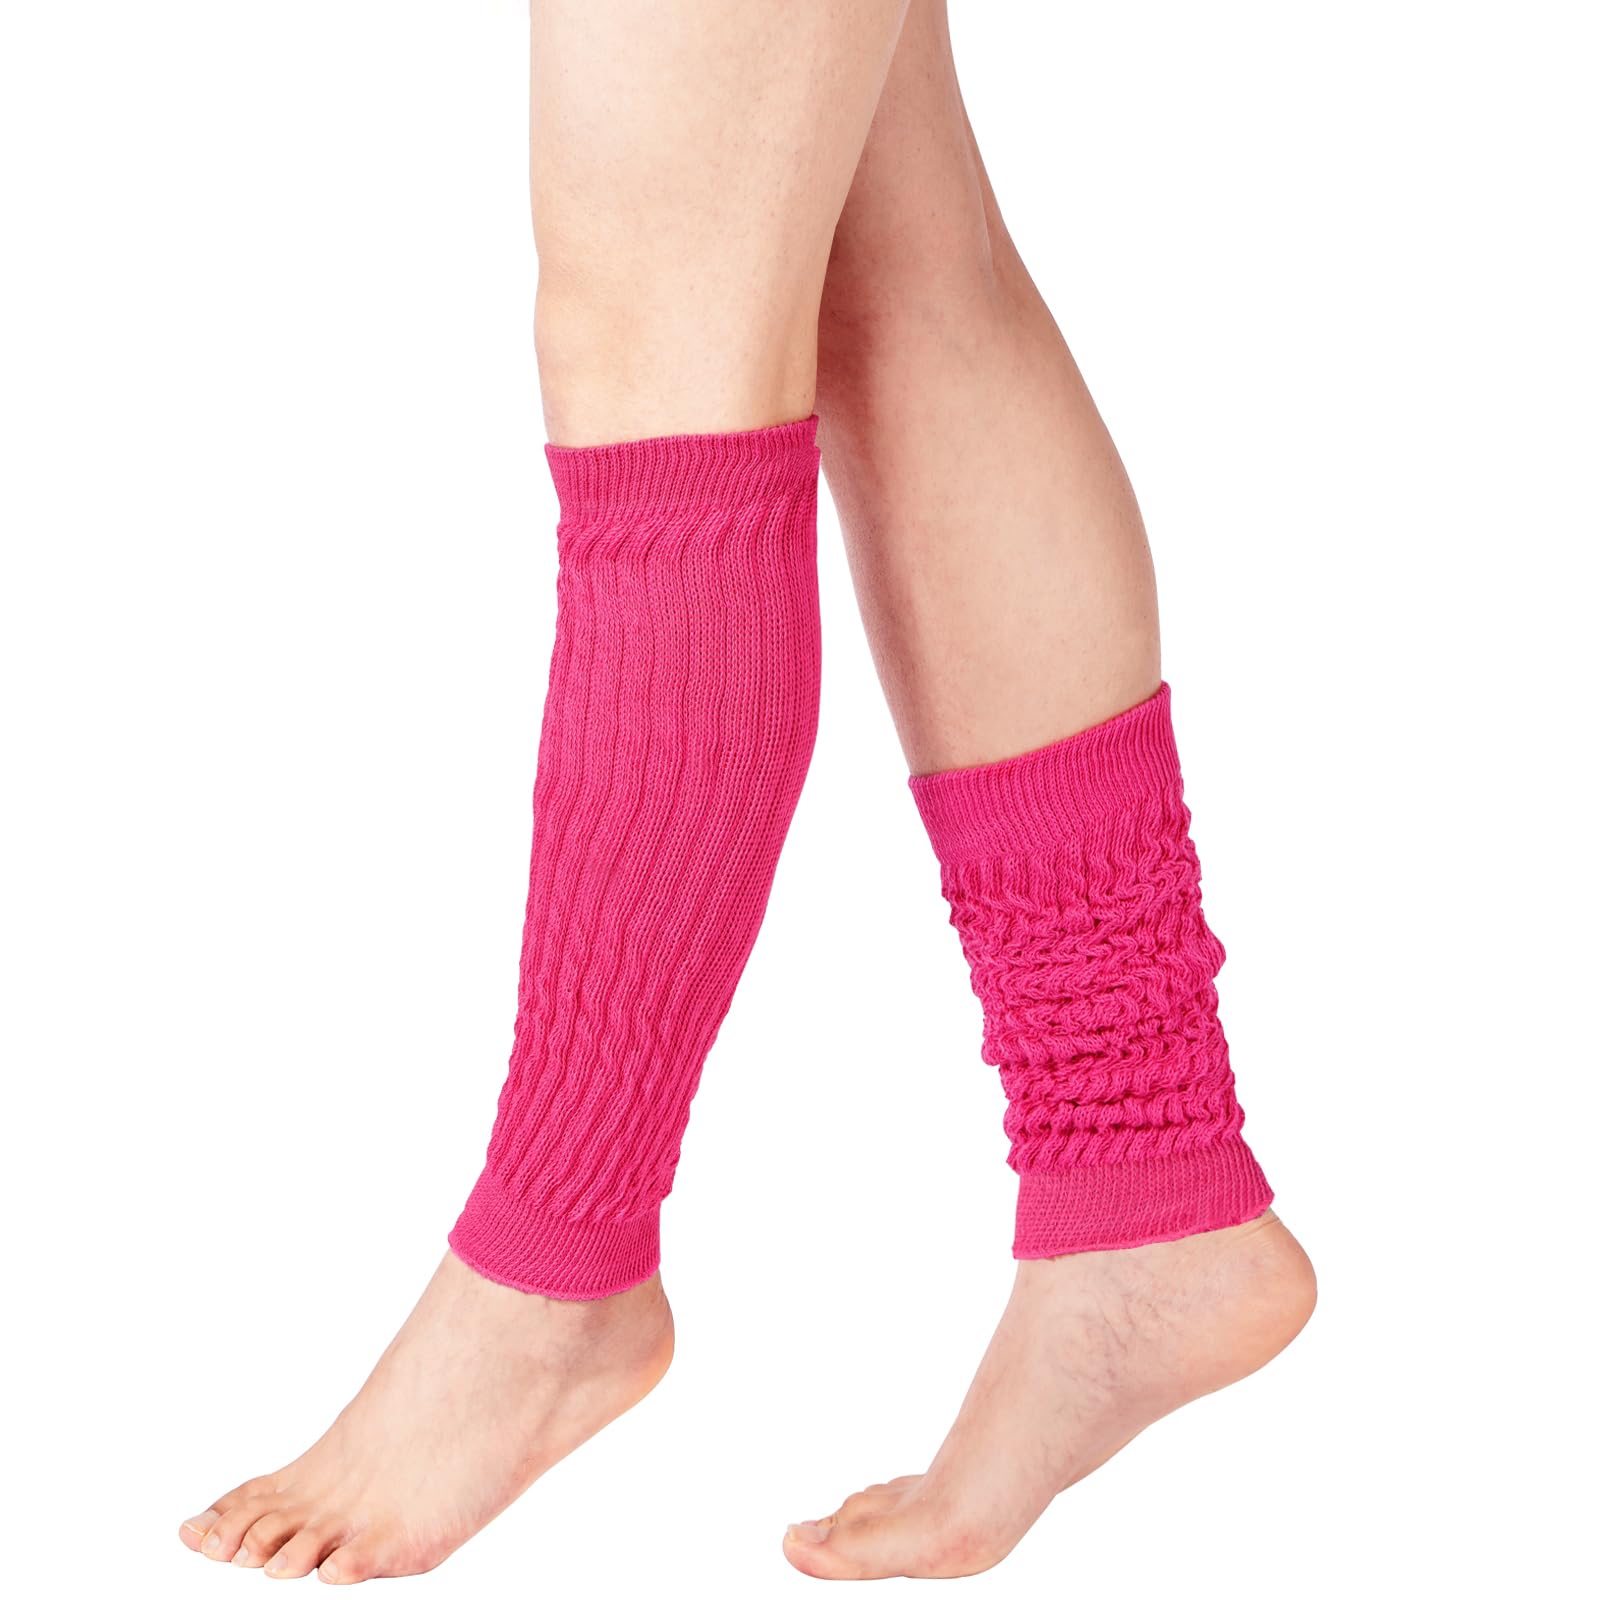 Cotton Slouch Leg Warmers-Rose - Moon Wood